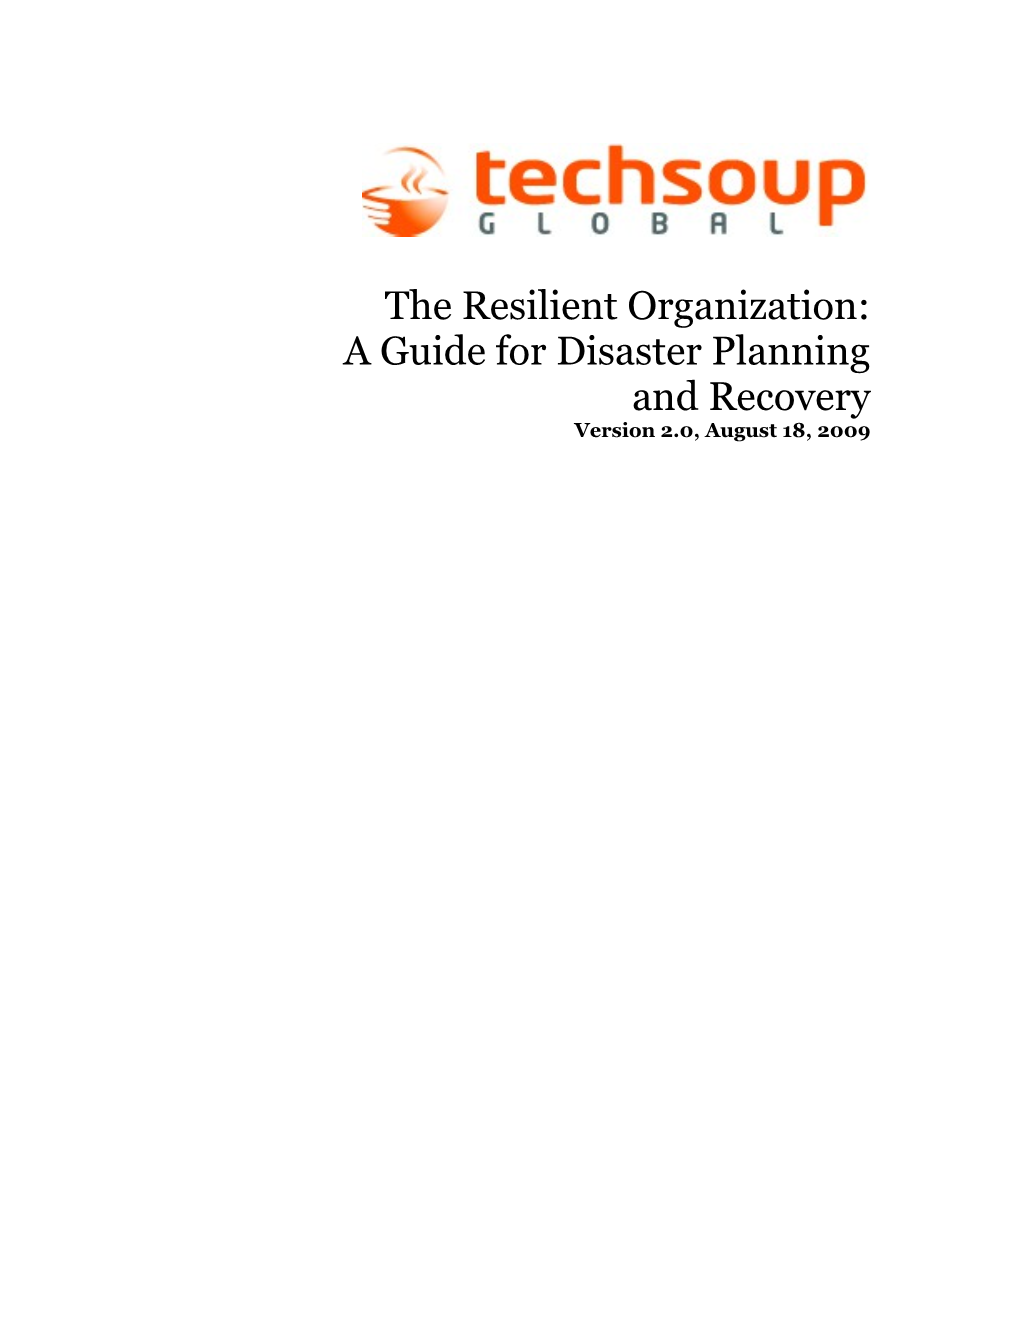 The Resilient Organization: a Guide for Disaster Planning